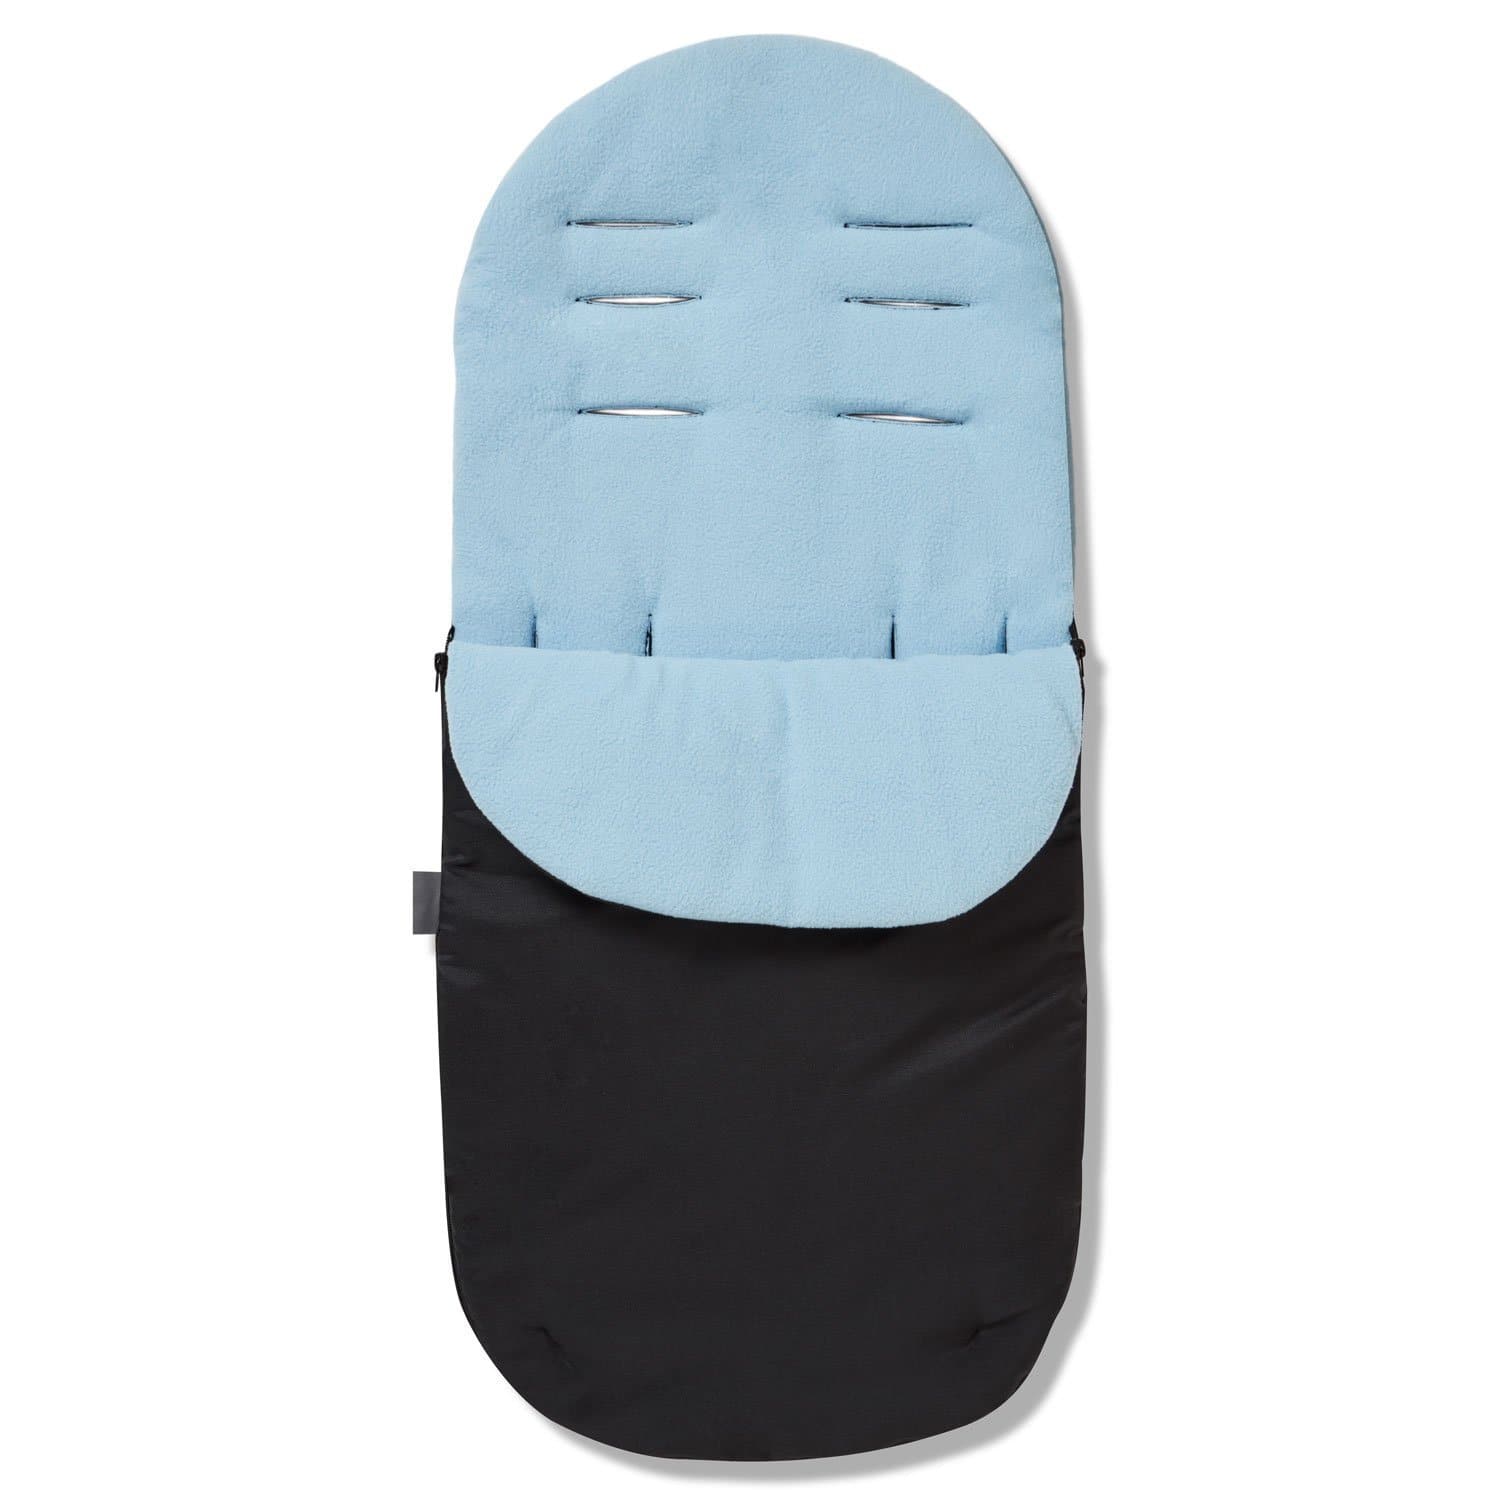 Footmuff / Cosy Toes Compatible with Diono - Light Blue / Fits All Models | For Your Little One